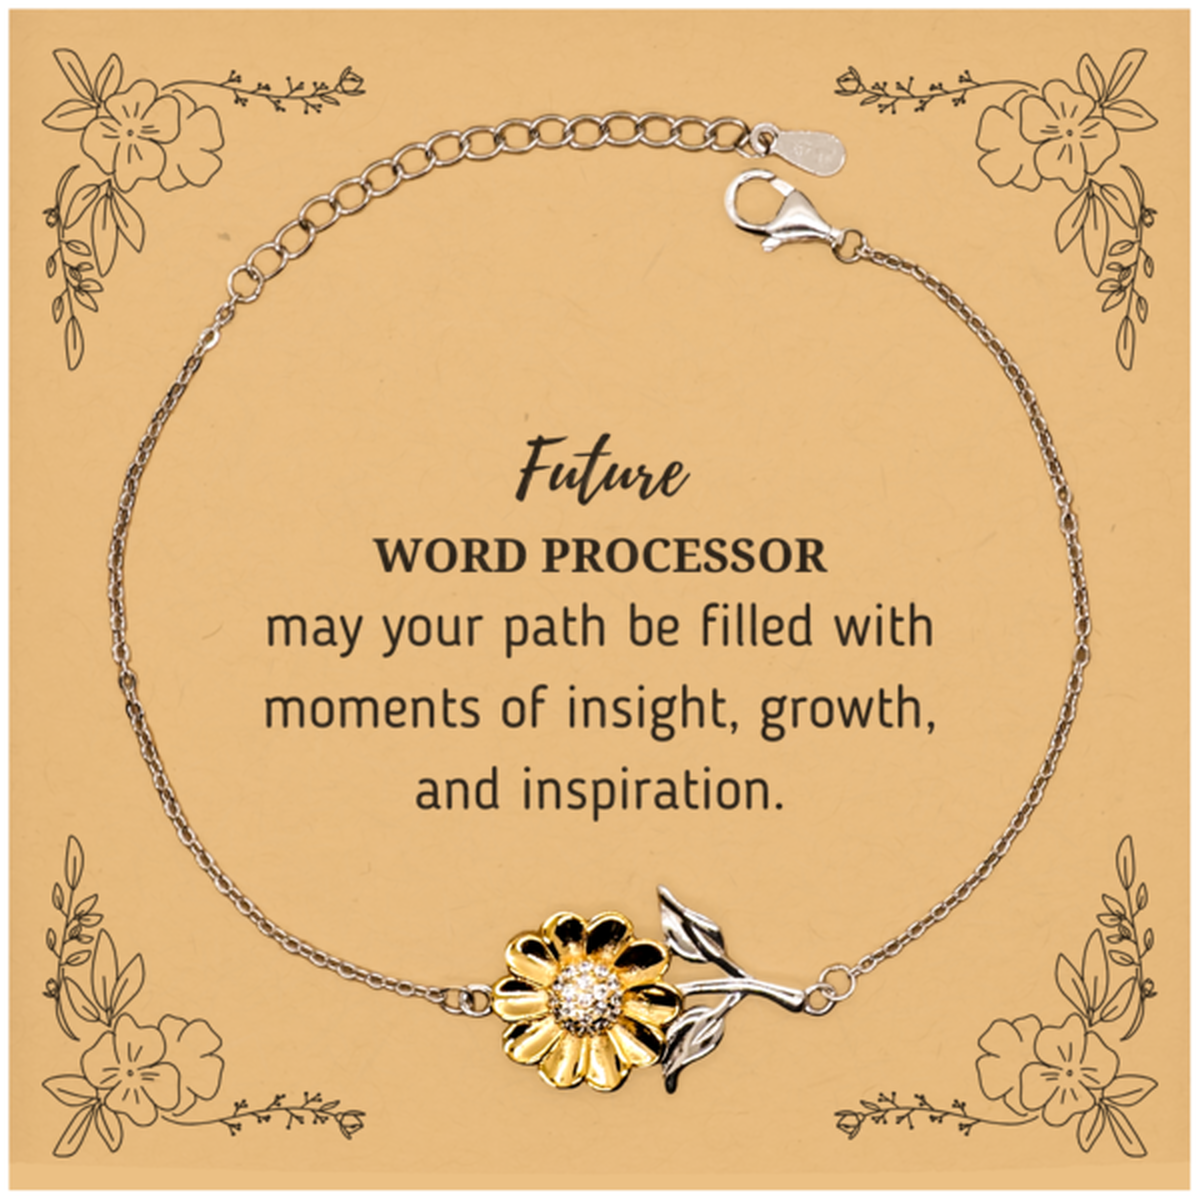 Future Word Processor Gifts, May your path be filled with moments of insight, Graduation Gifts for New Word Processor, Christmas Unique Sunflower Bracelet For Men, Women, Friends